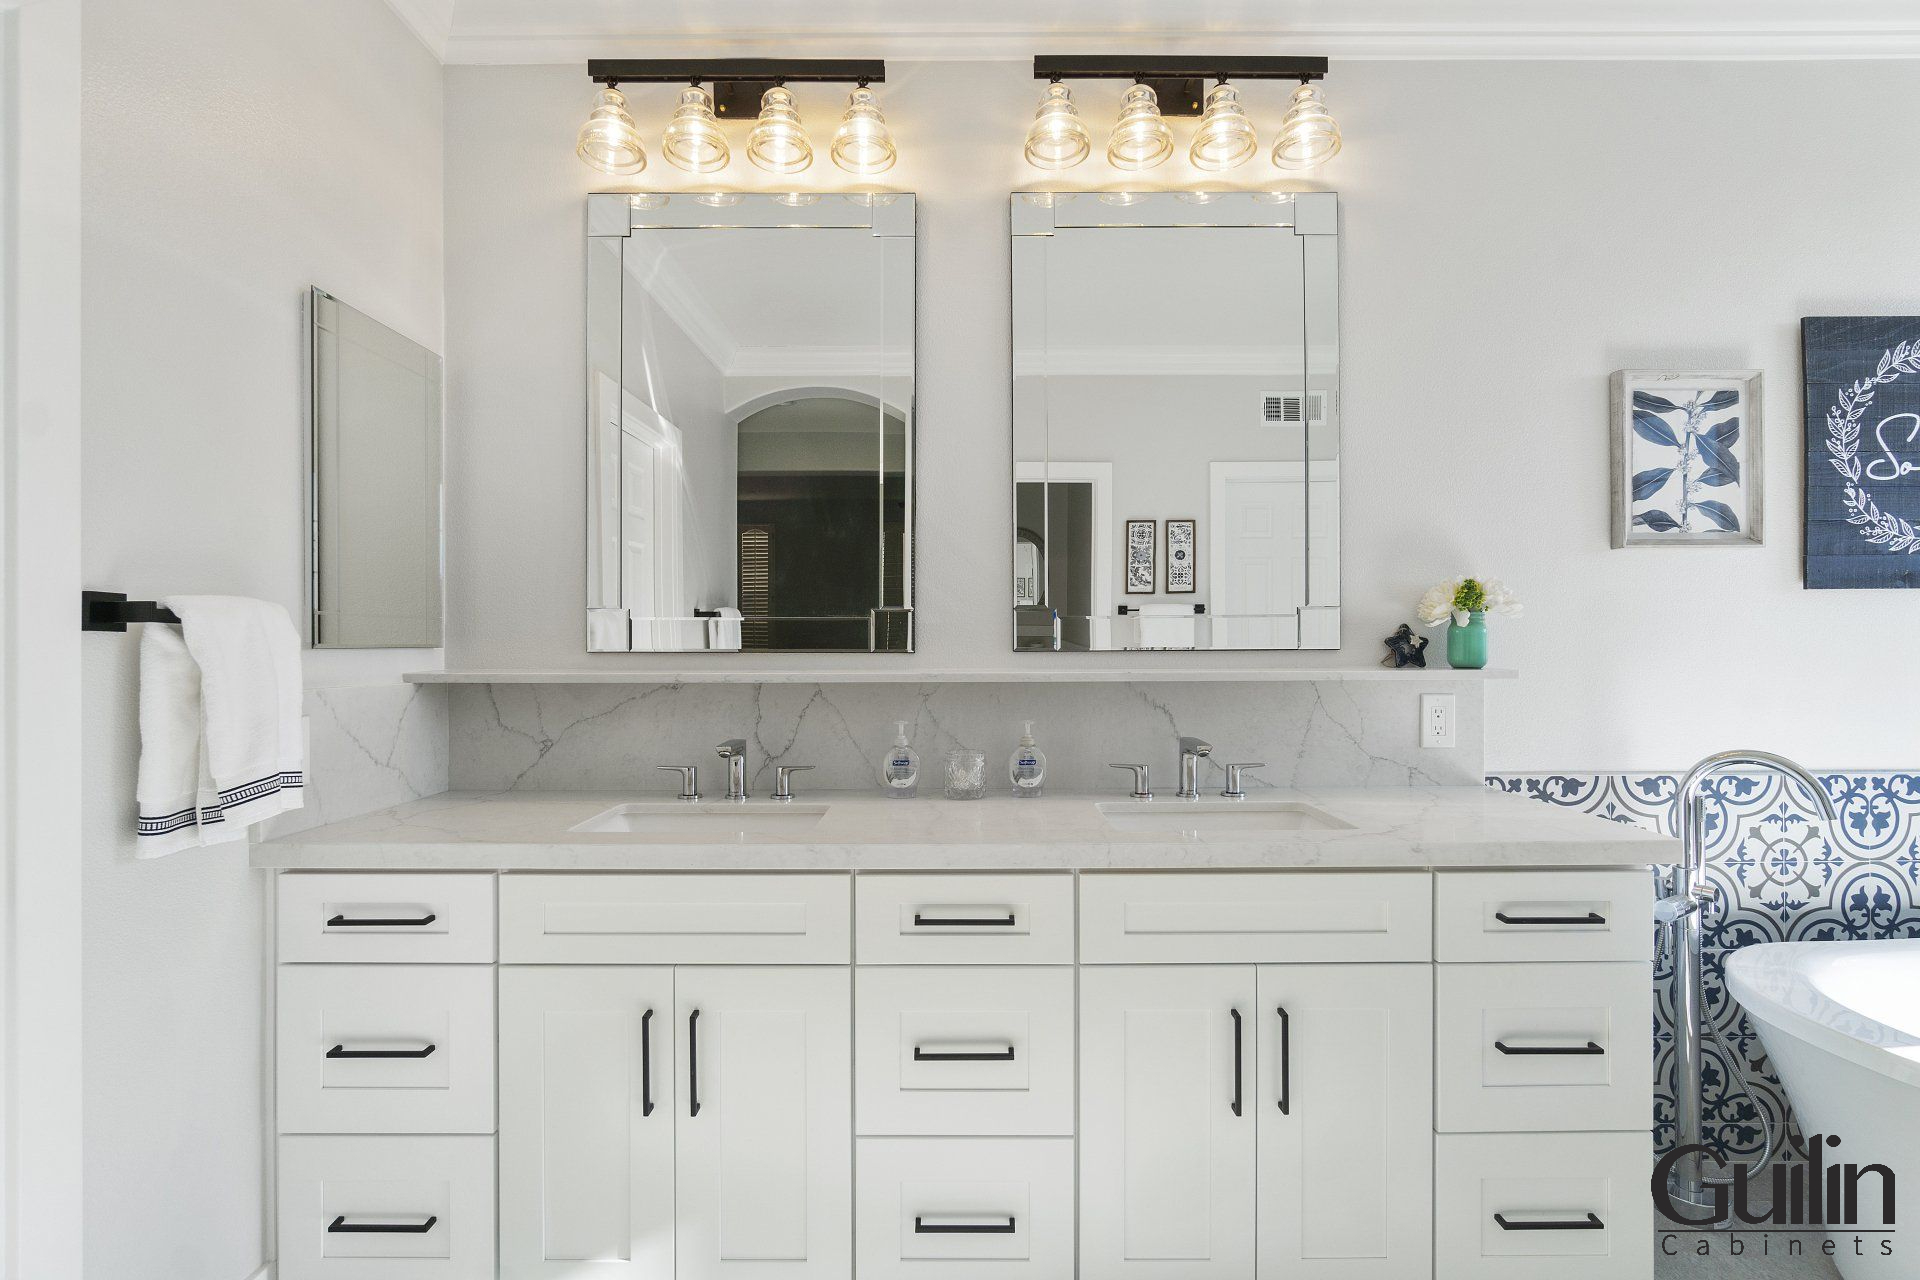 The best choice for you vanity countertops Bathroom depends on a variety of factors,